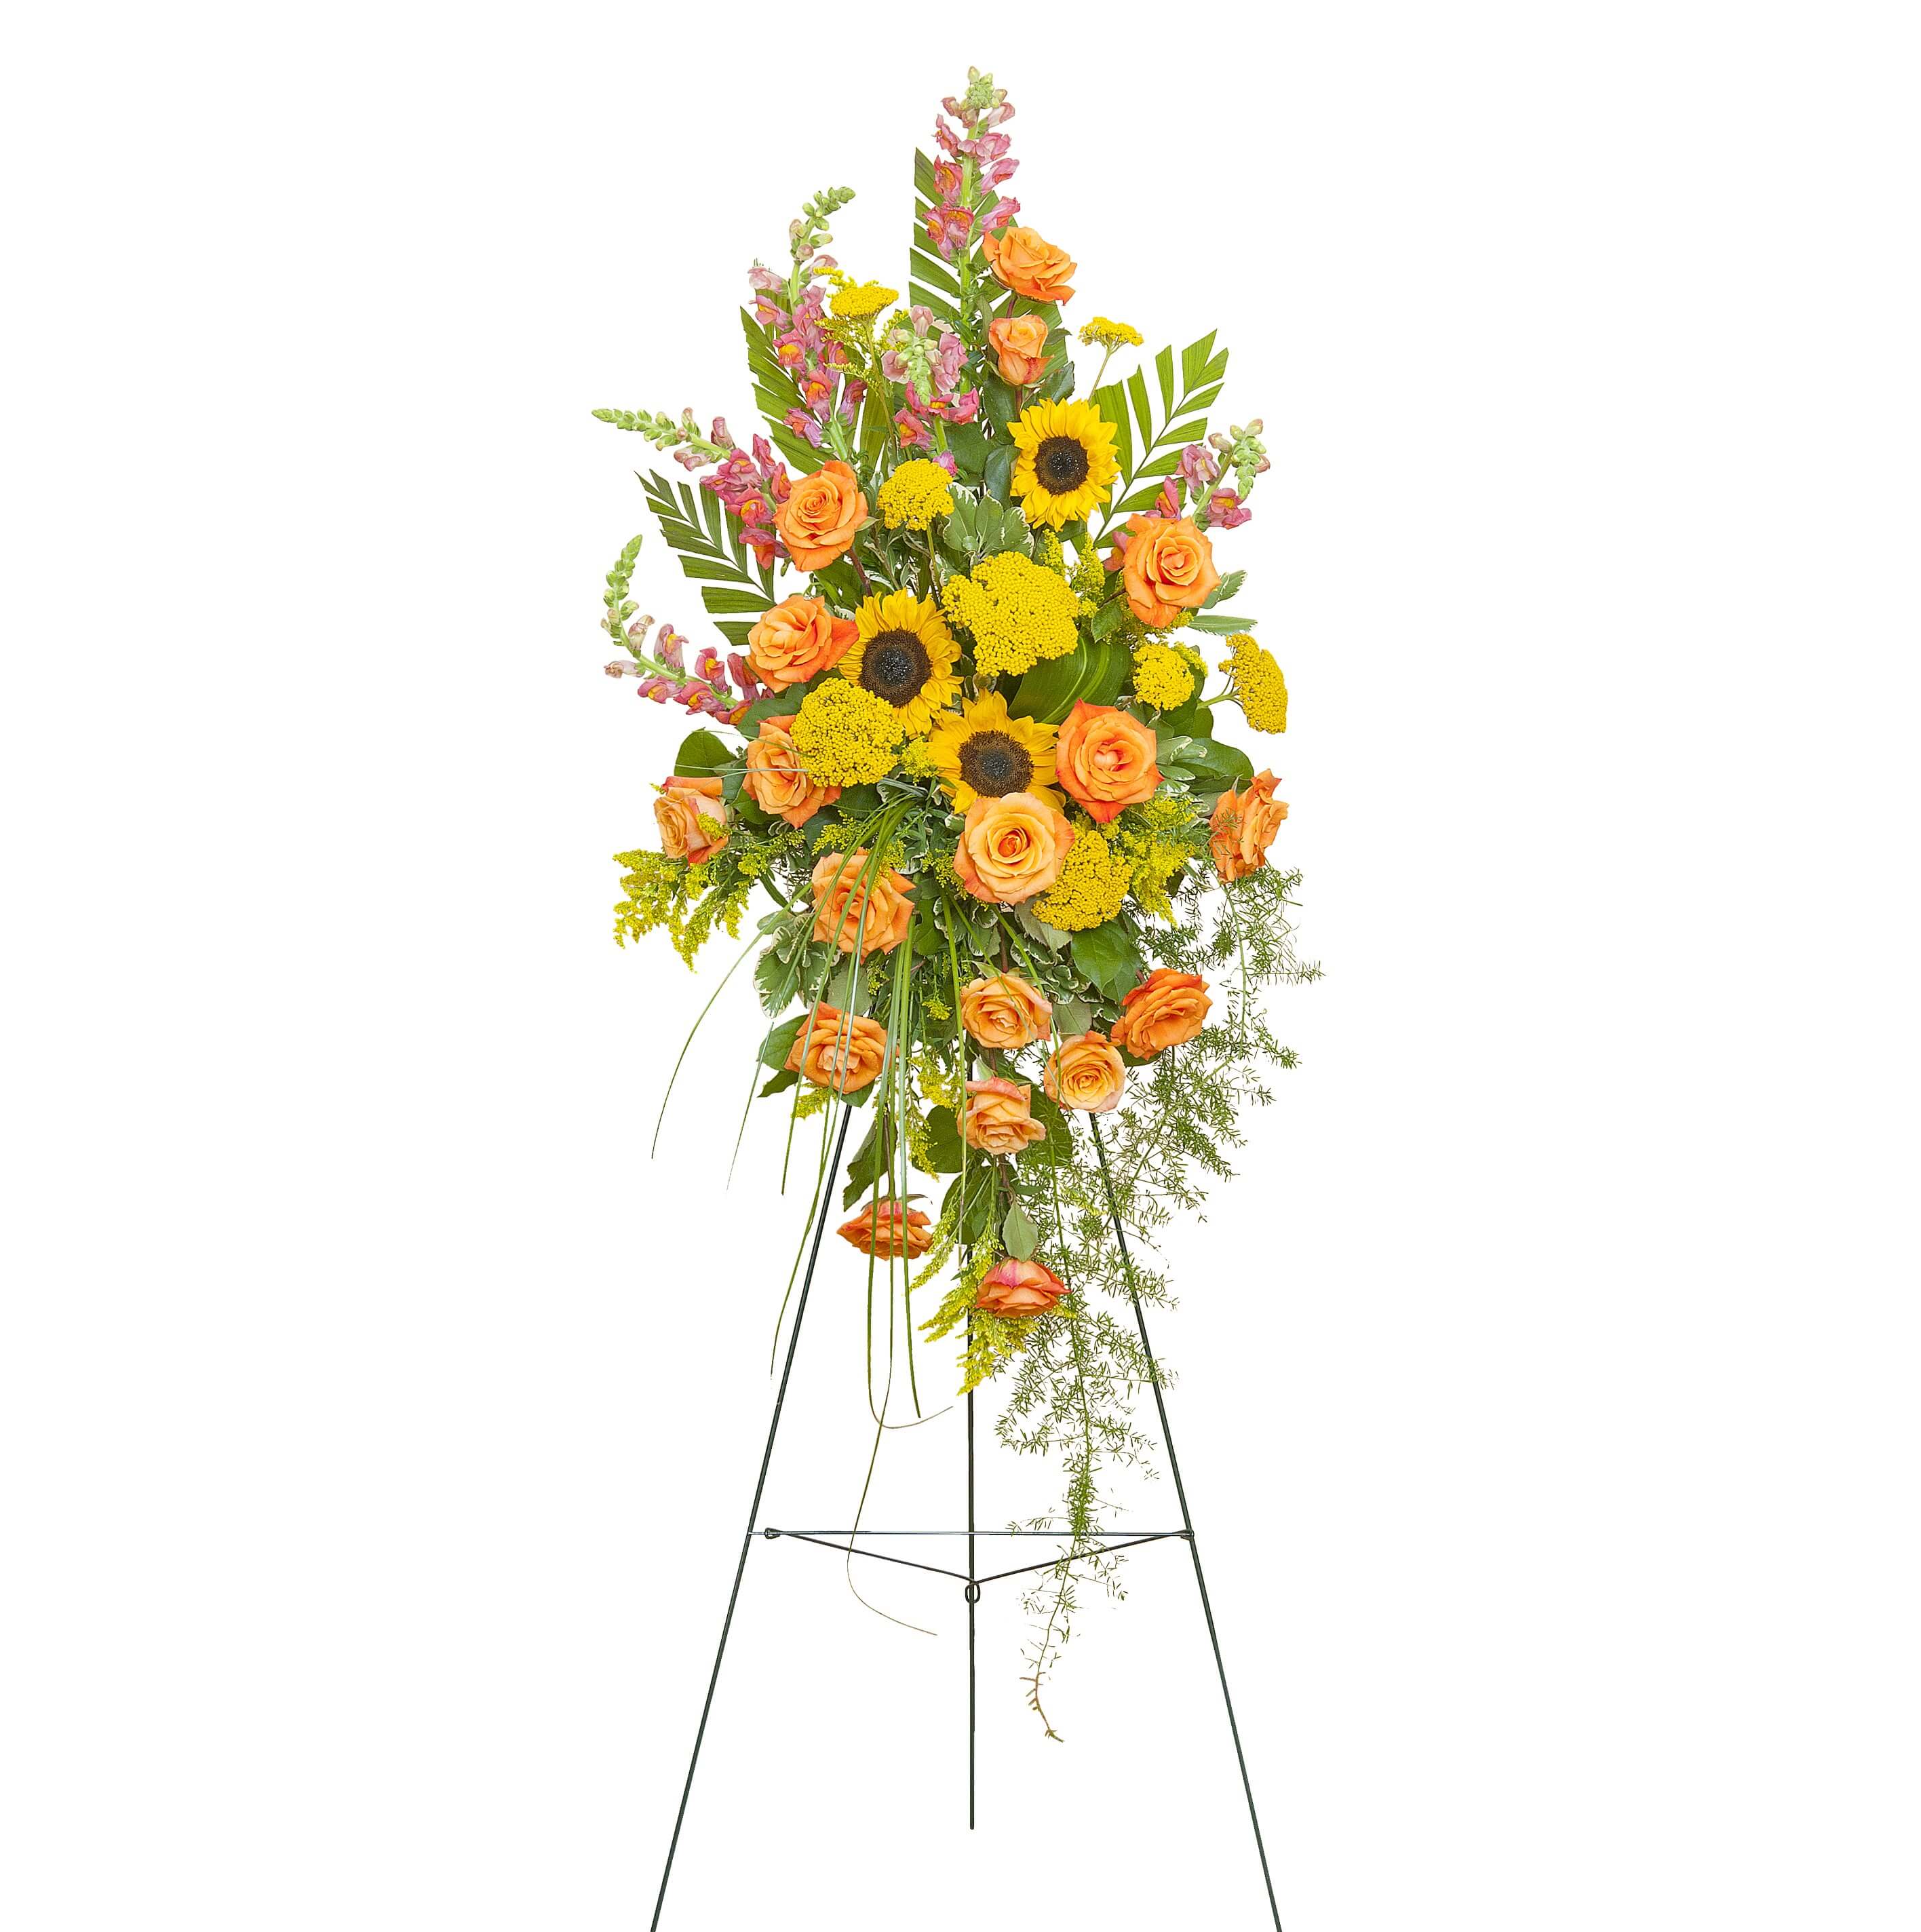 Heaven's Sunset Standing Spray - This beautiful easel spray includes Sunflowers, Roses, and Snapdragons with accents of premium flowers and foliage.